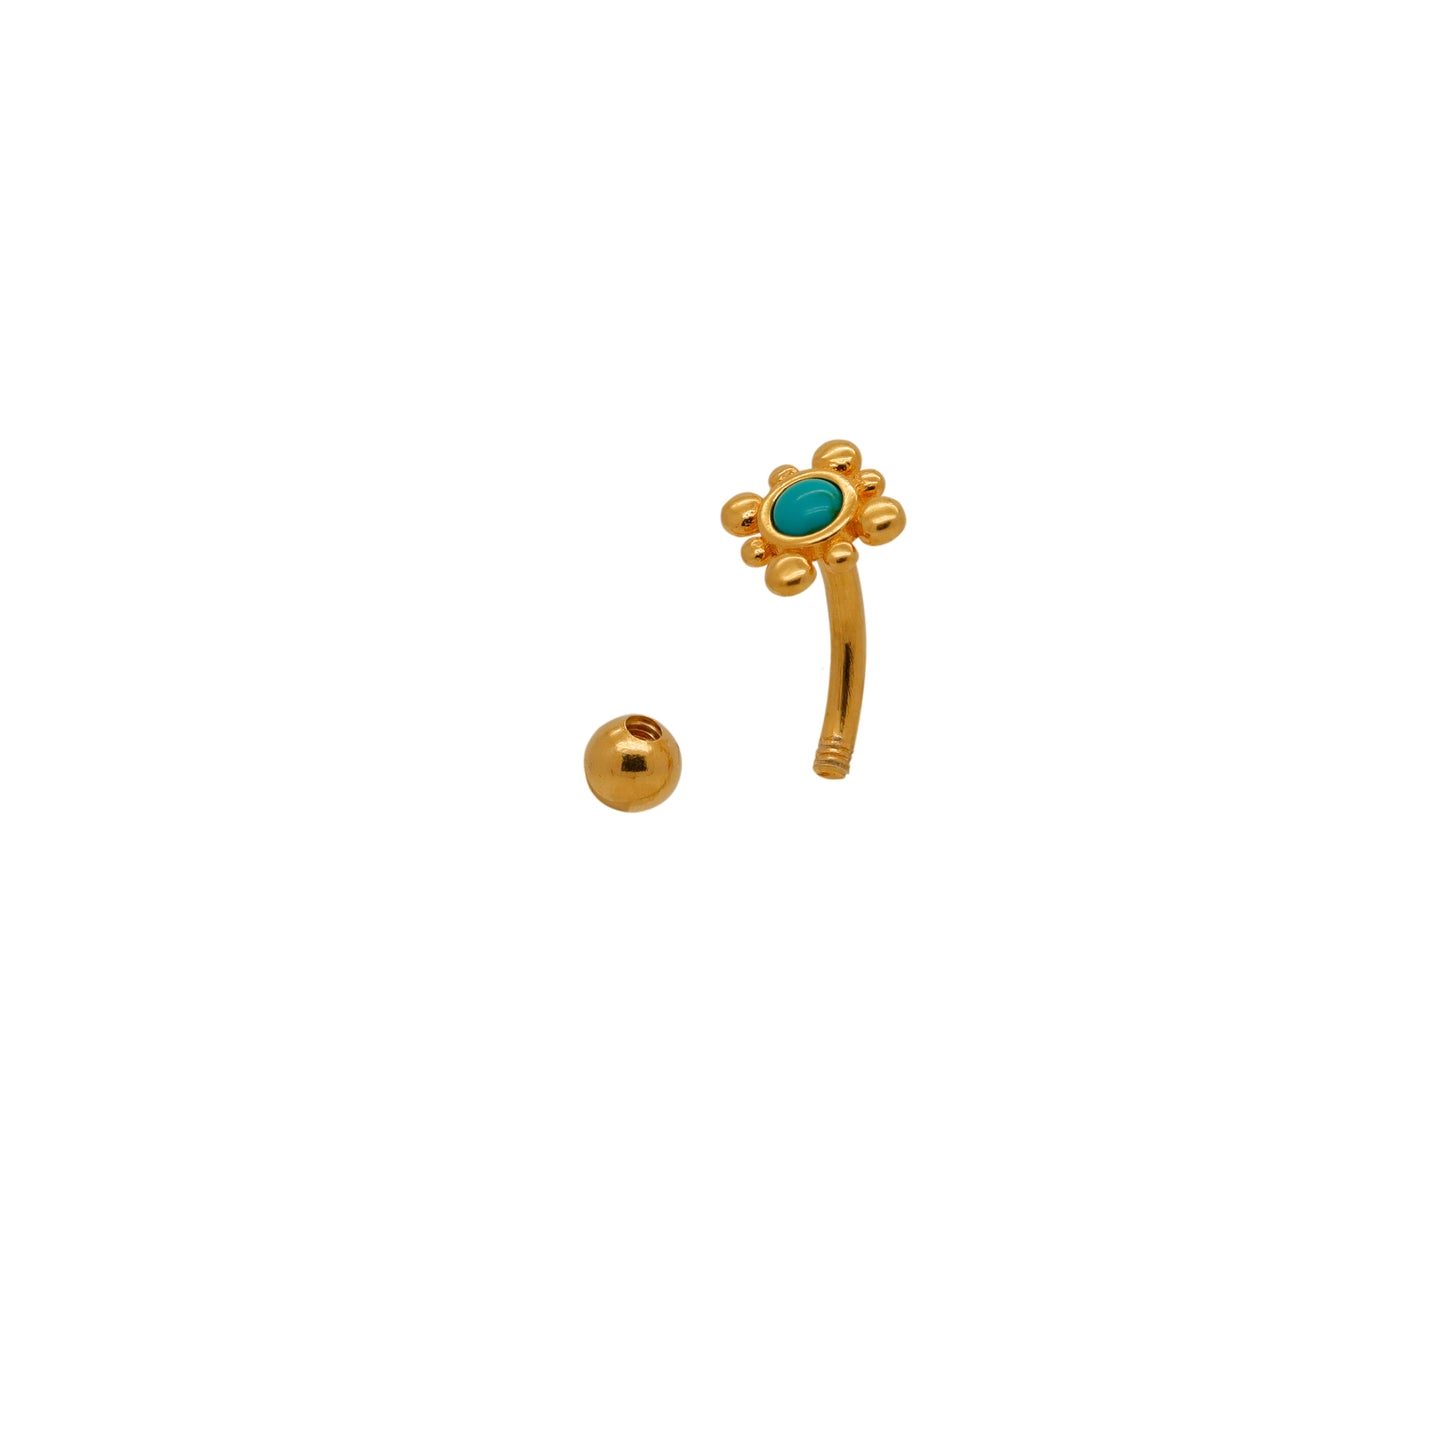 Vermeil | 925 Silver 24k Gold Coated 14G Turquoise Petite Sun Reverse Belly Ring | 6mm 1/4" 8mm 5/16" 10mm 3/8"